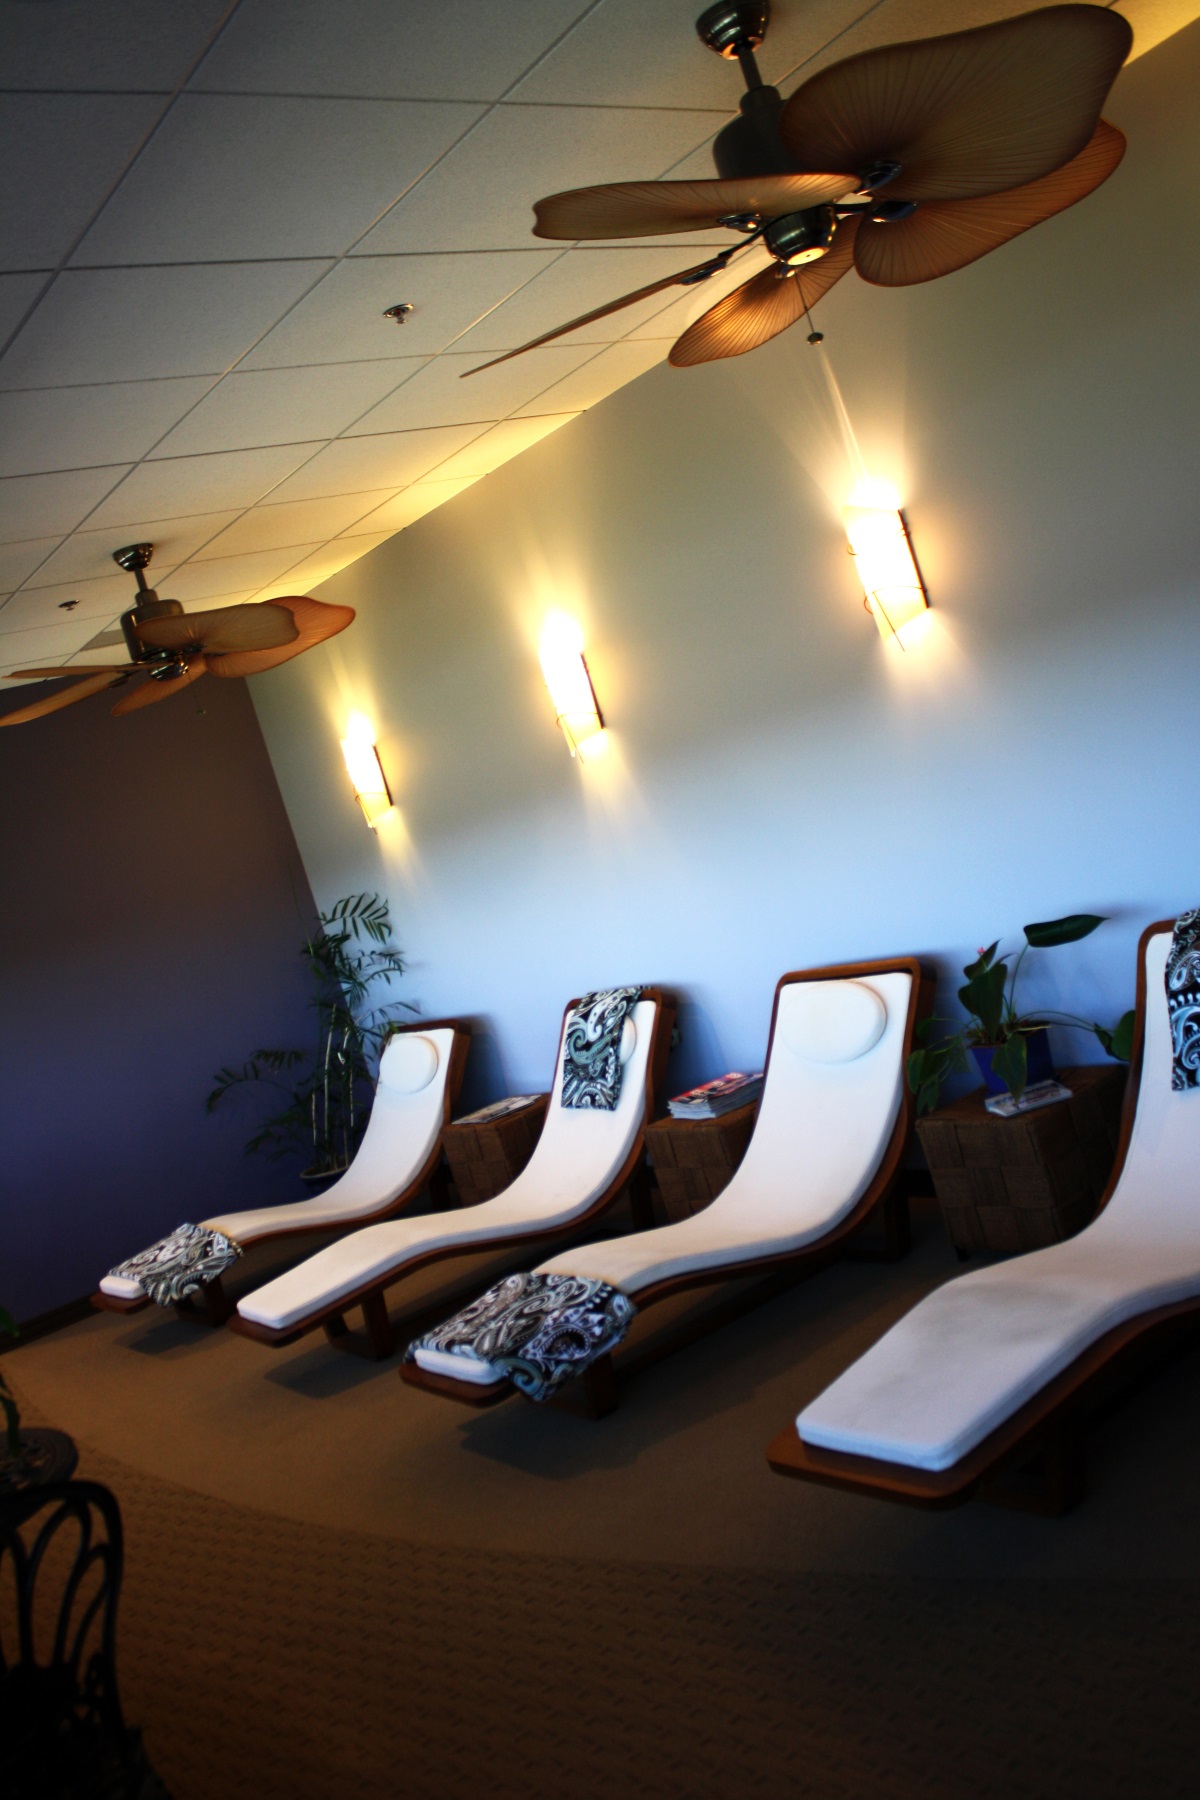 Lounge area at St. Louis Cosmetic Surgery